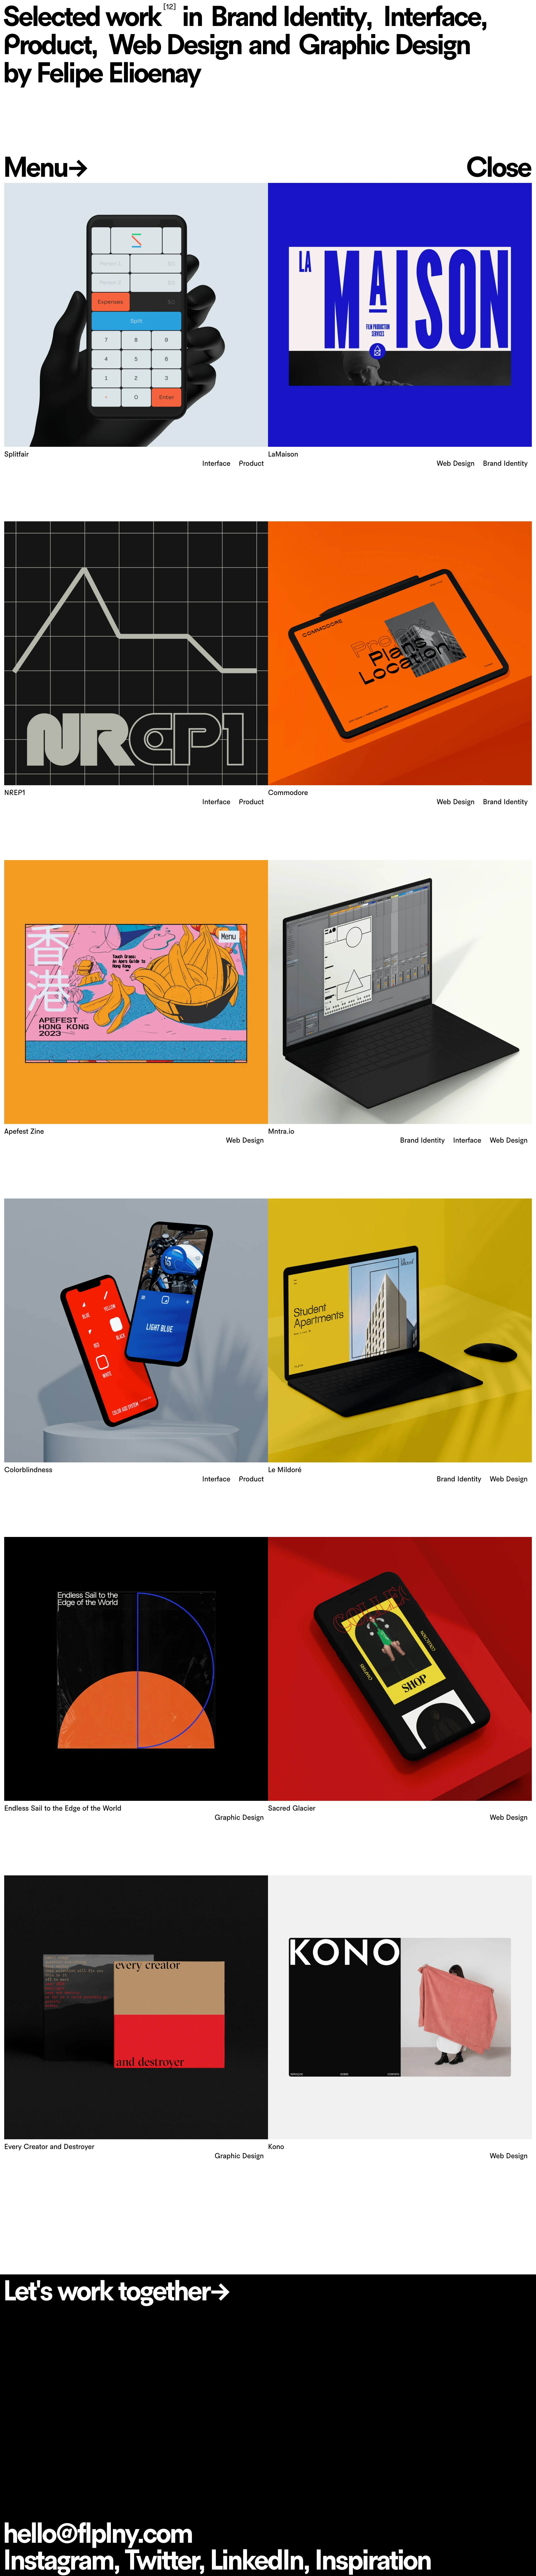 Flplny Landing Page Example: Felipe Elioenay is a Freelance Senior Designer focused on Contemporary Interface & Brand Identity Design. He has worked with clients like Nike, Google, Meta, Instrument, Universal Studios, Raw Materials, and more.